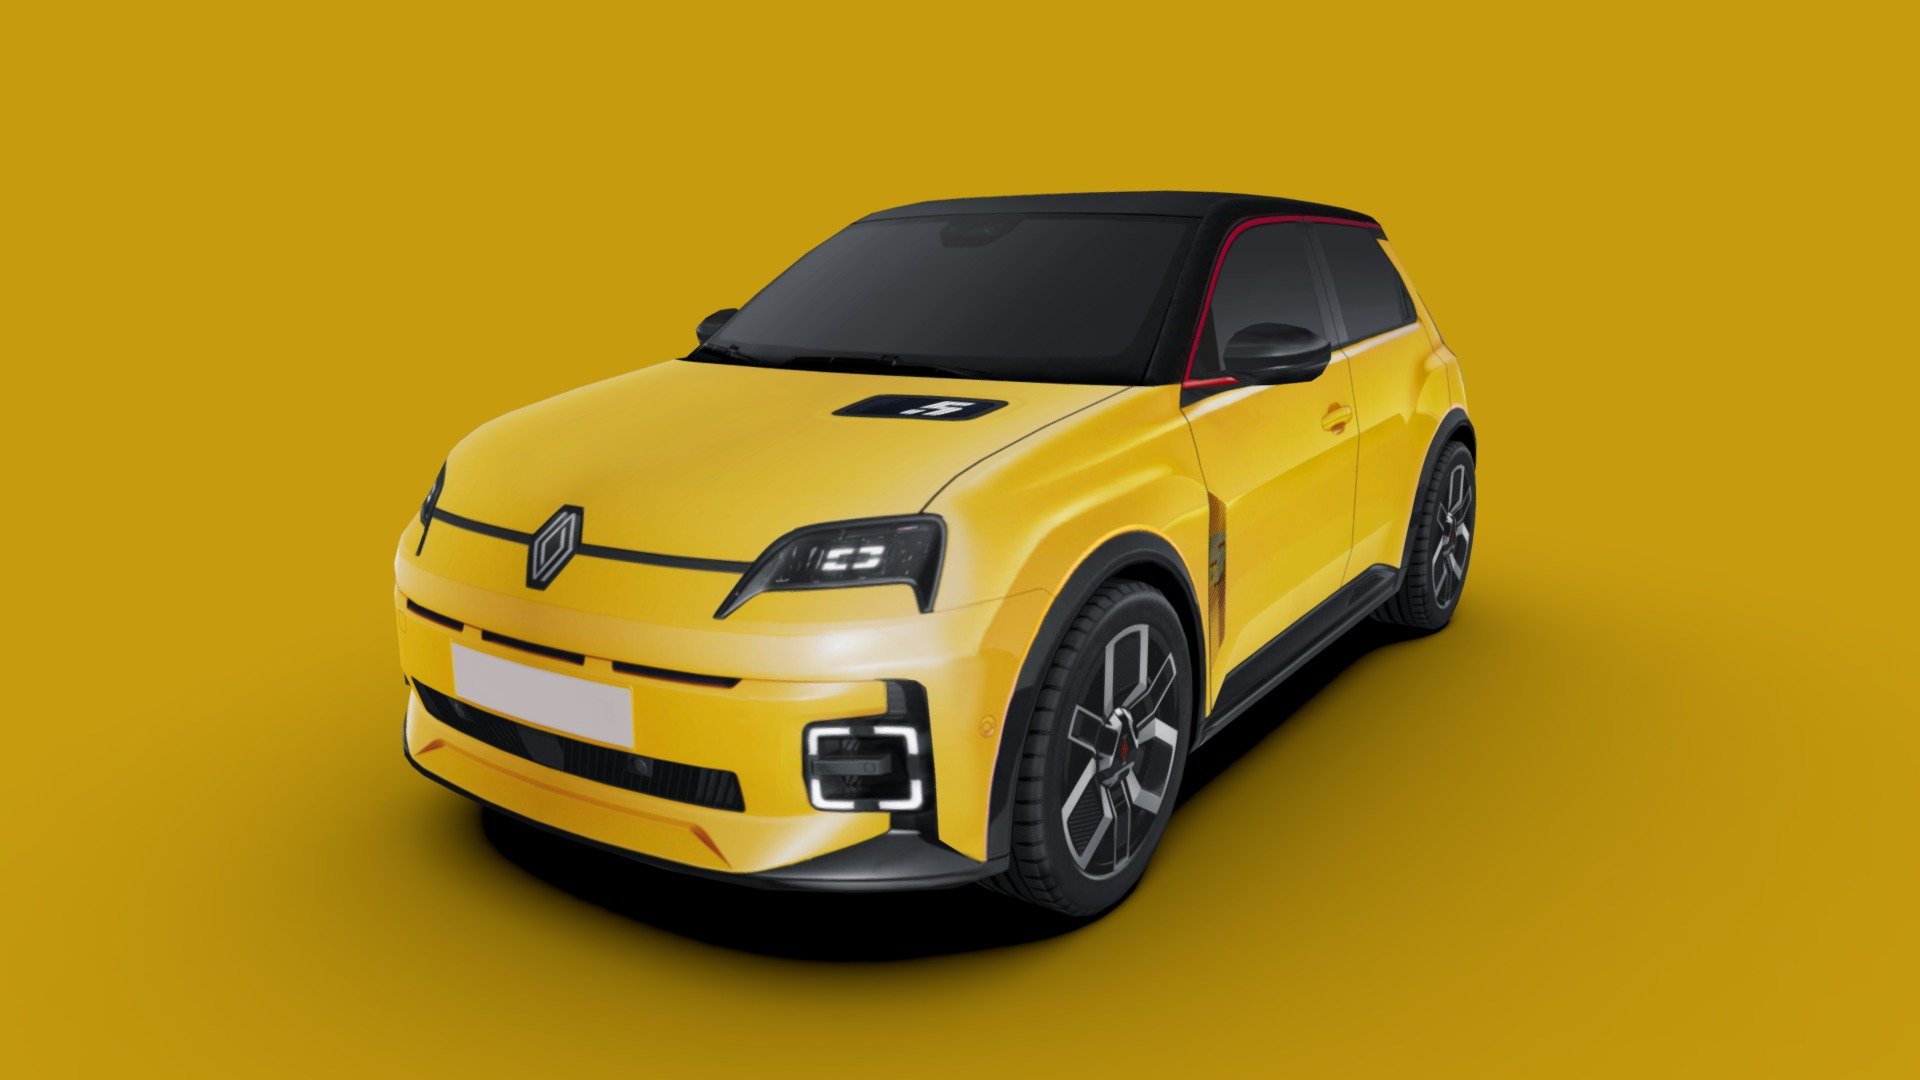 3d model of the 2025 Renault 5 E-Tech, a hatchback battery electric car

The model is very low-poly, full-scale, real photos texture (single 2048 x 2048 png).

Package includes 6 file formats and texture (3ds, fbx, dae, gltf, obj and skp)

Hope you enjoy it.

José Bronze - Renault 5 E-Tech 2025 - Buy Royalty Free 3D model by Jose Bronze (@pinceladas3d) 3d model